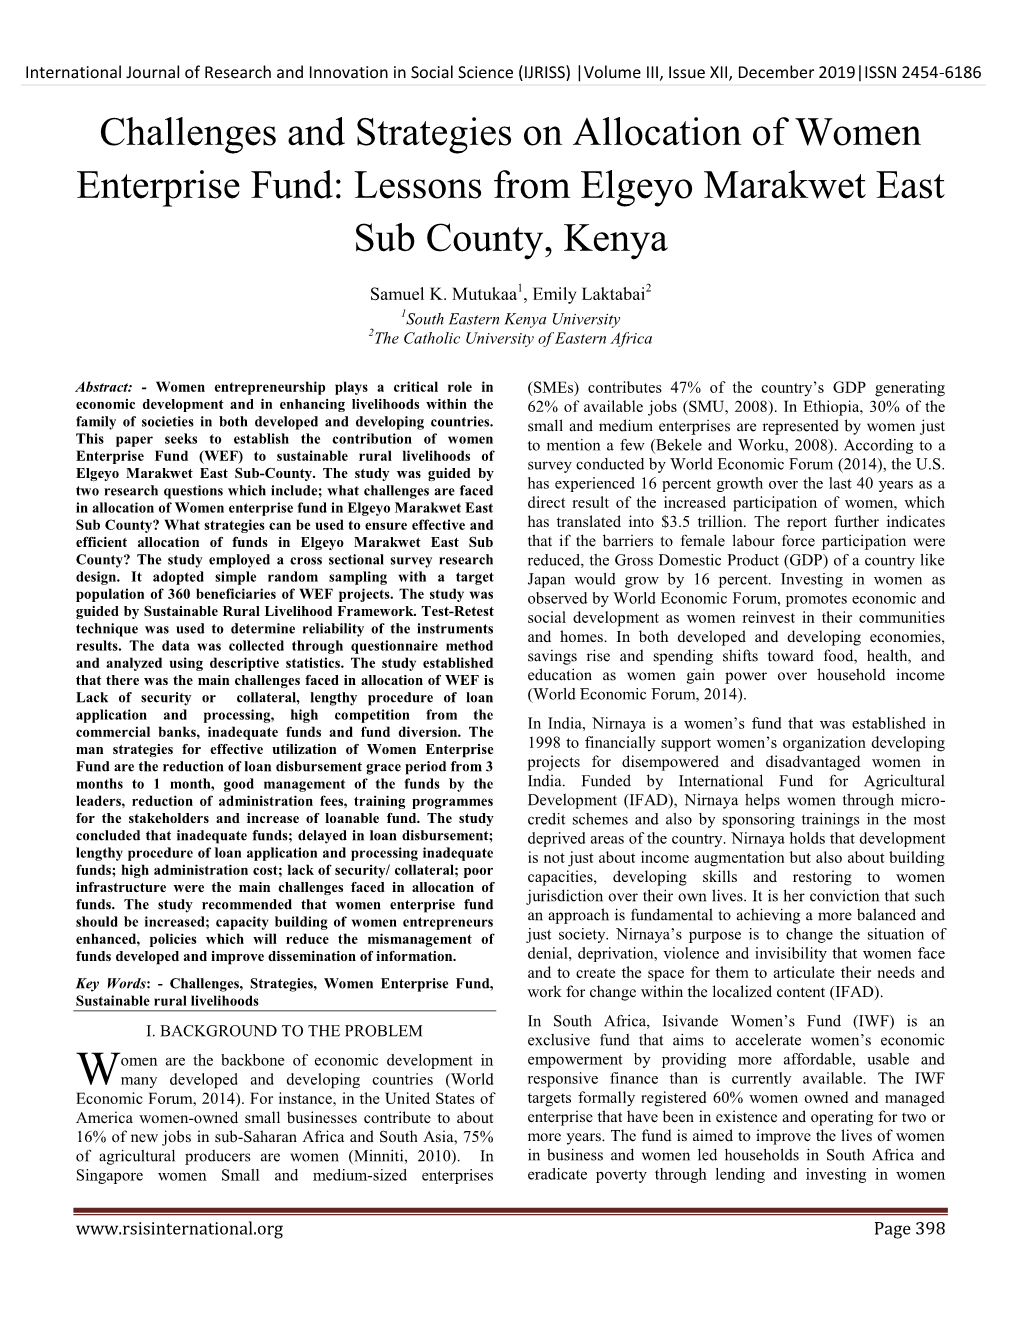 Challenges and Strategies on Allocation of Women Enterprise Fund: Lessons from Elgeyo Marakwet East Sub County, Kenya